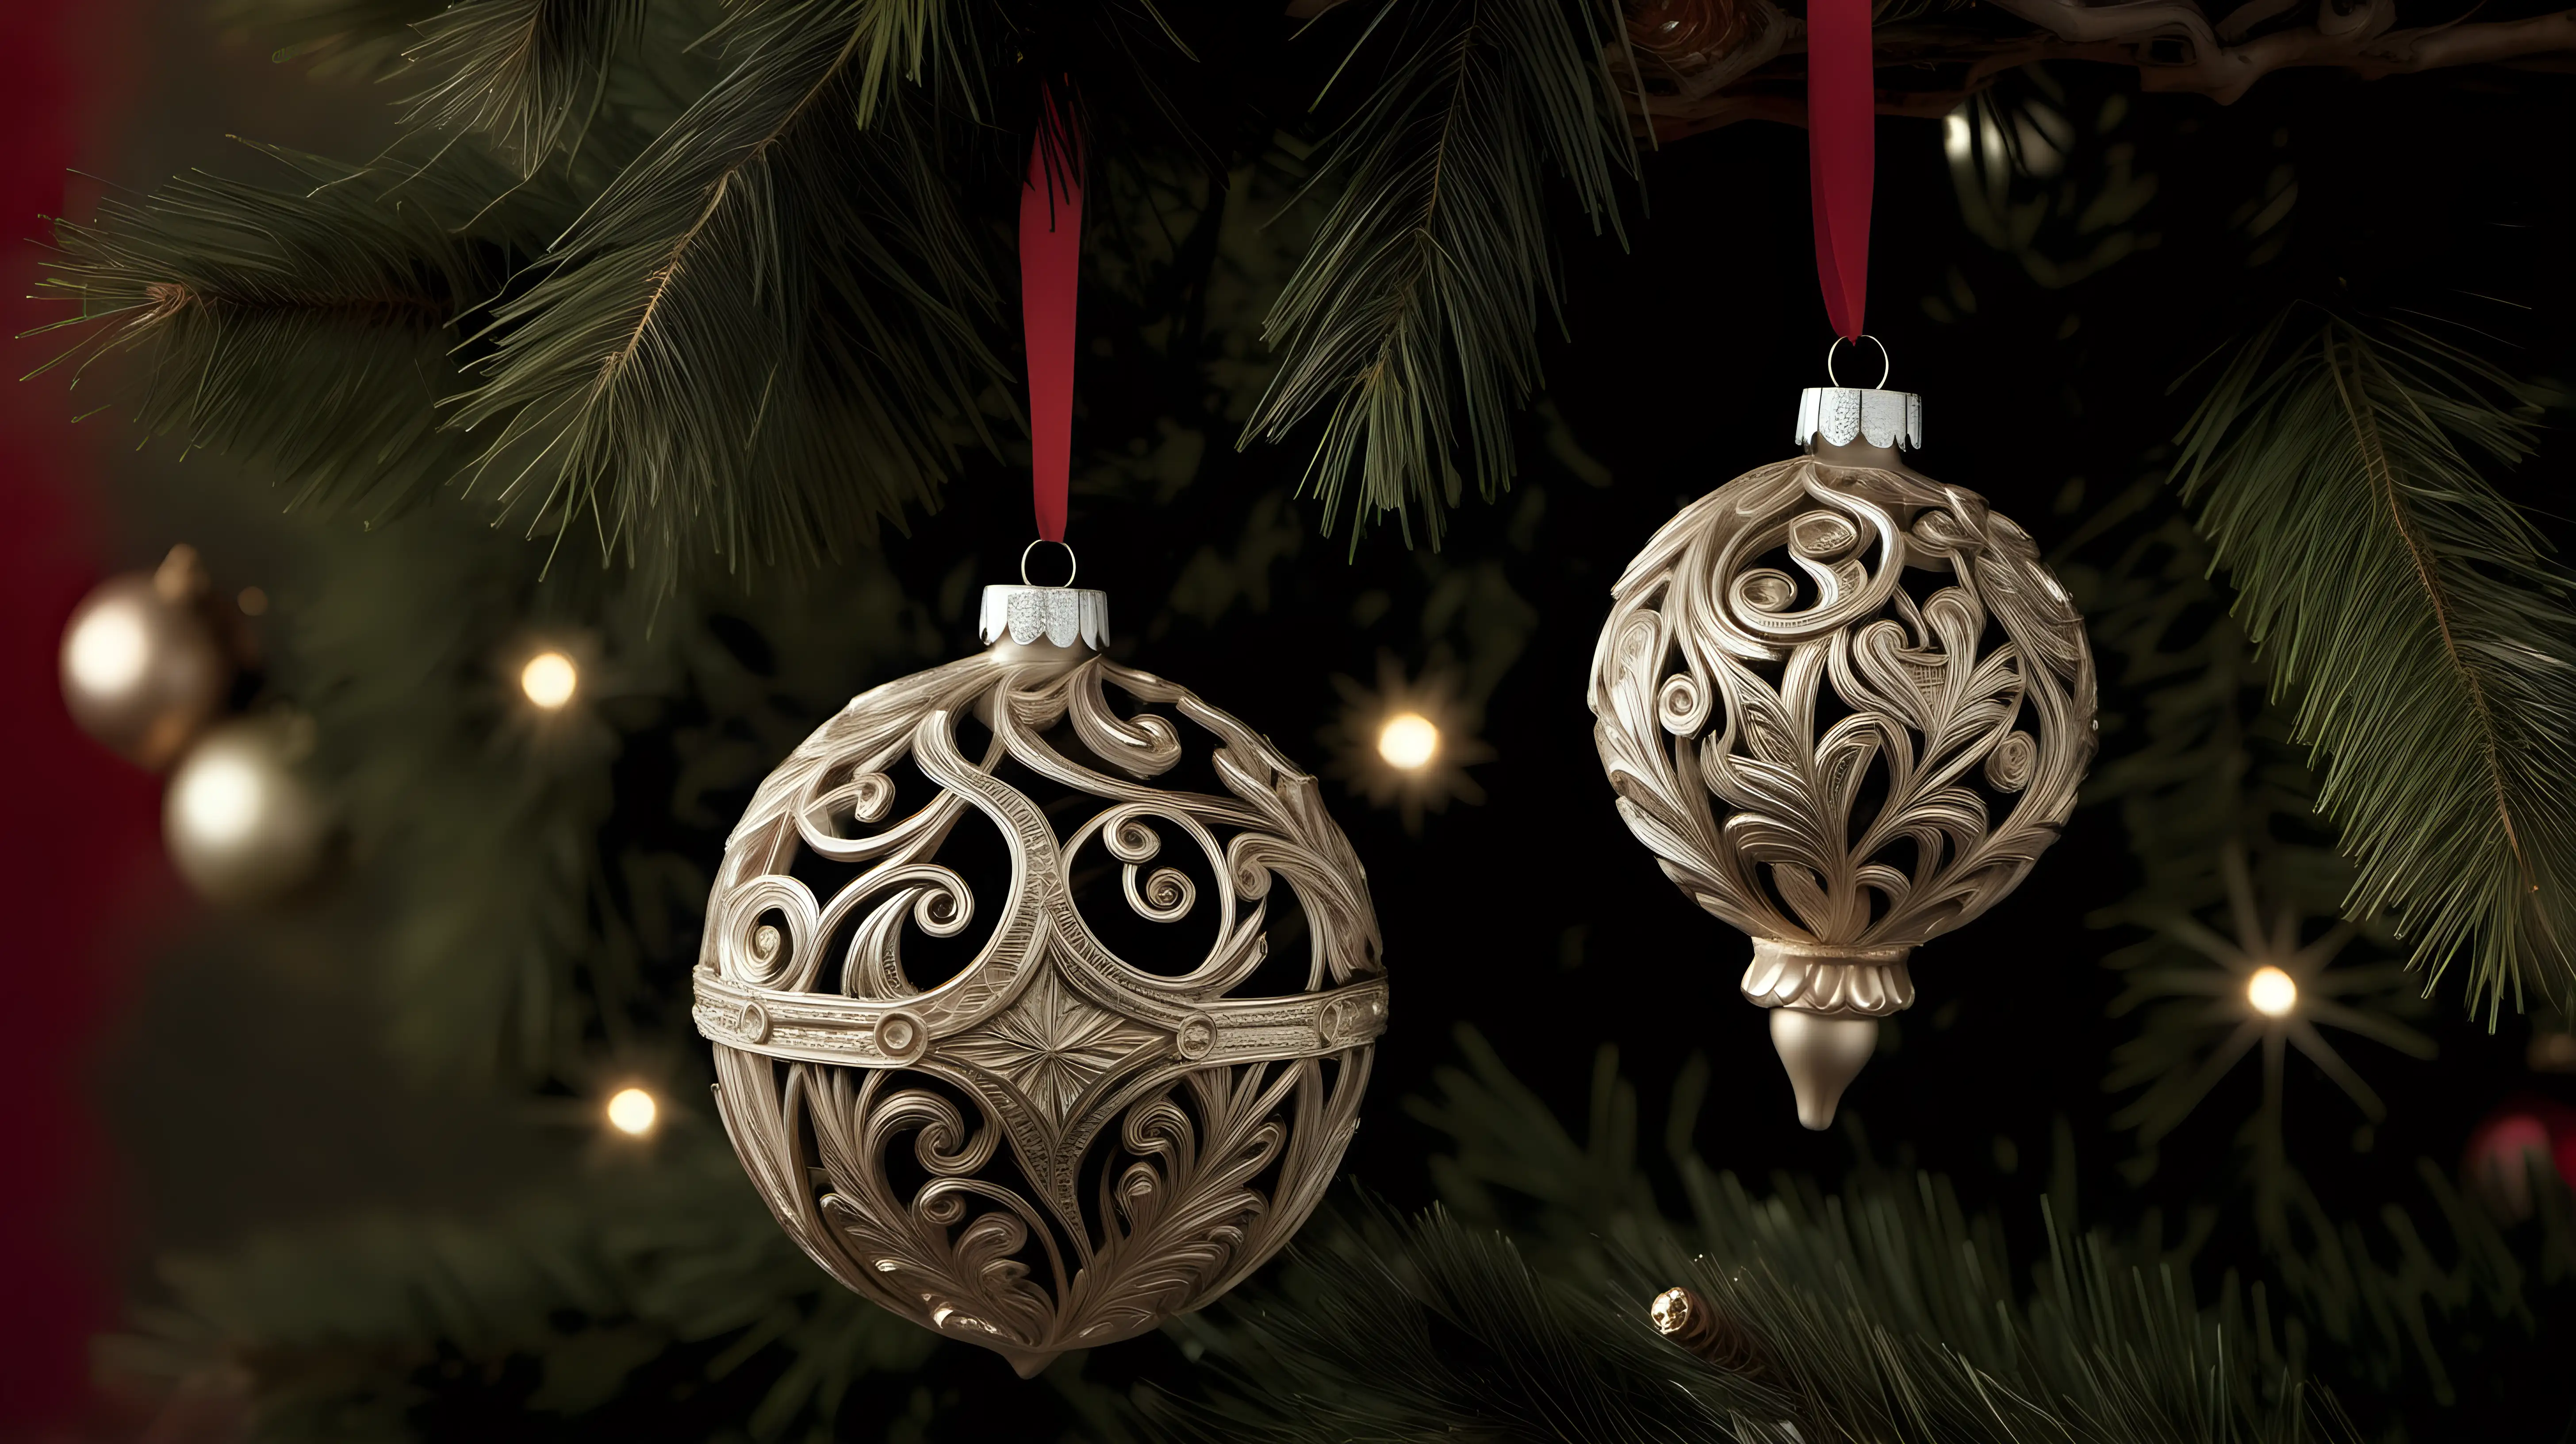 Intricate Handcrafted Christmas Tree Ornaments A CloseUp of Cherished Memories